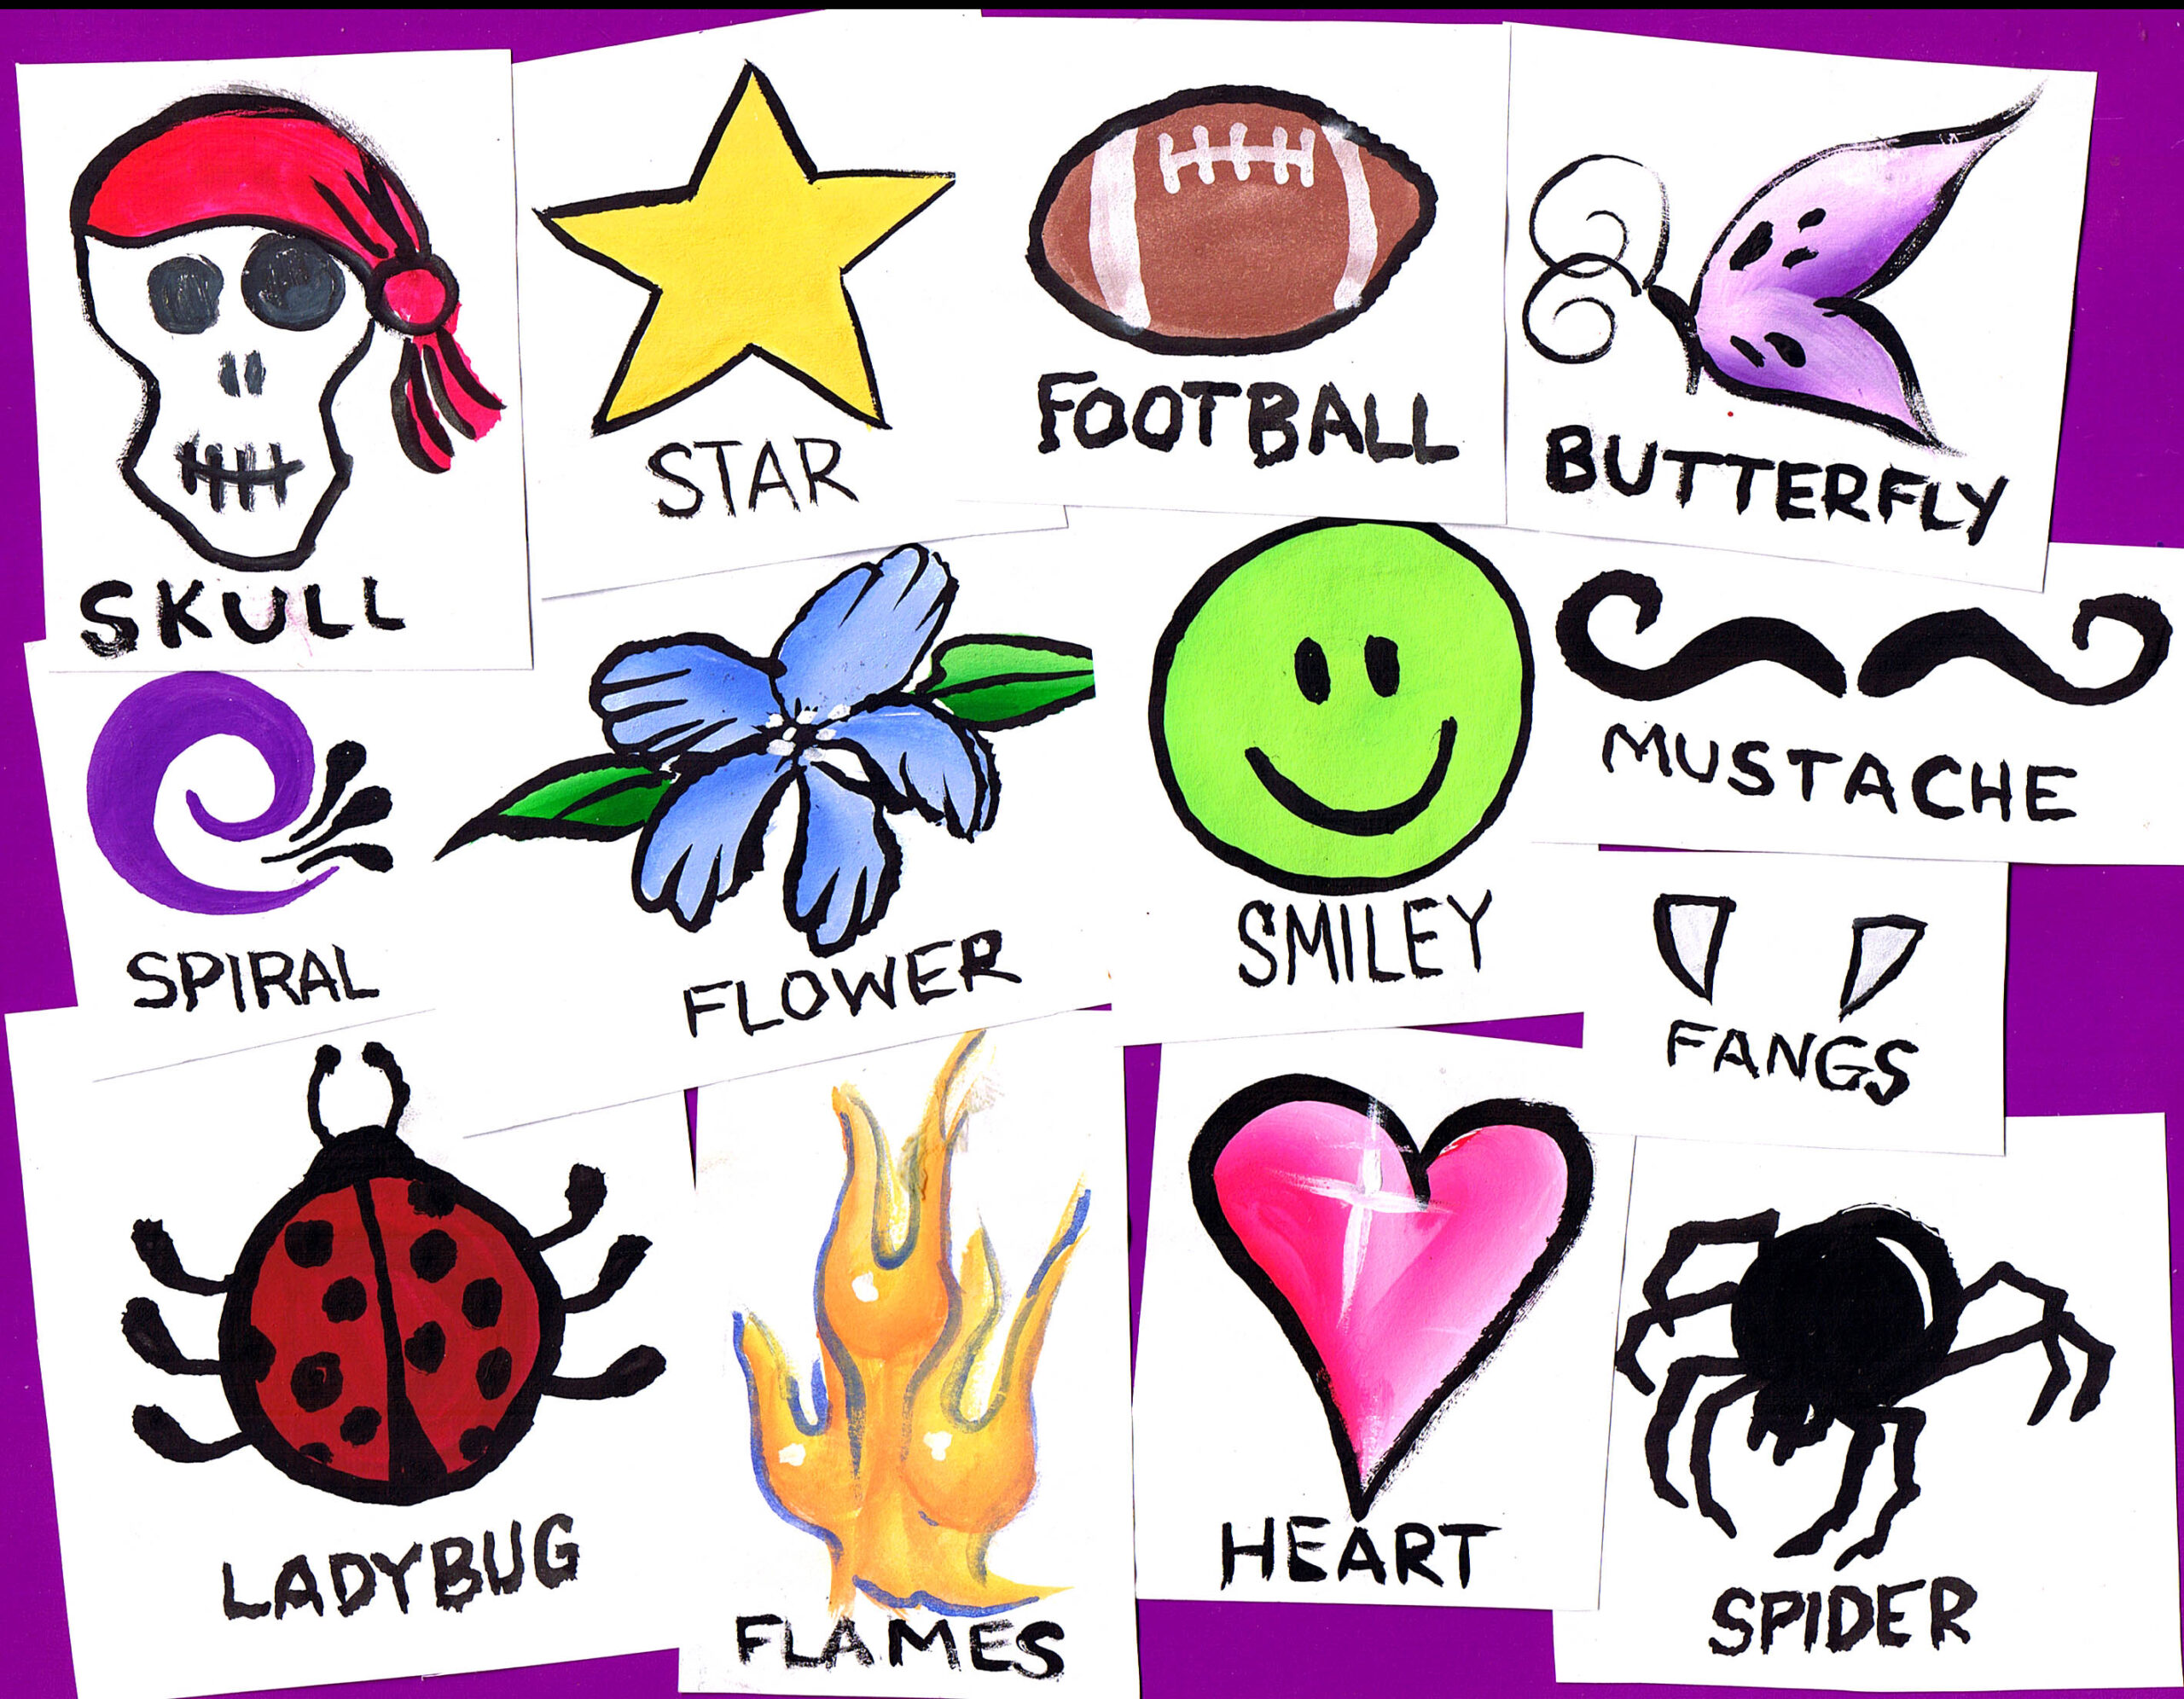 A menu of quick design options including flower, skull, football, butterfly, heart and more